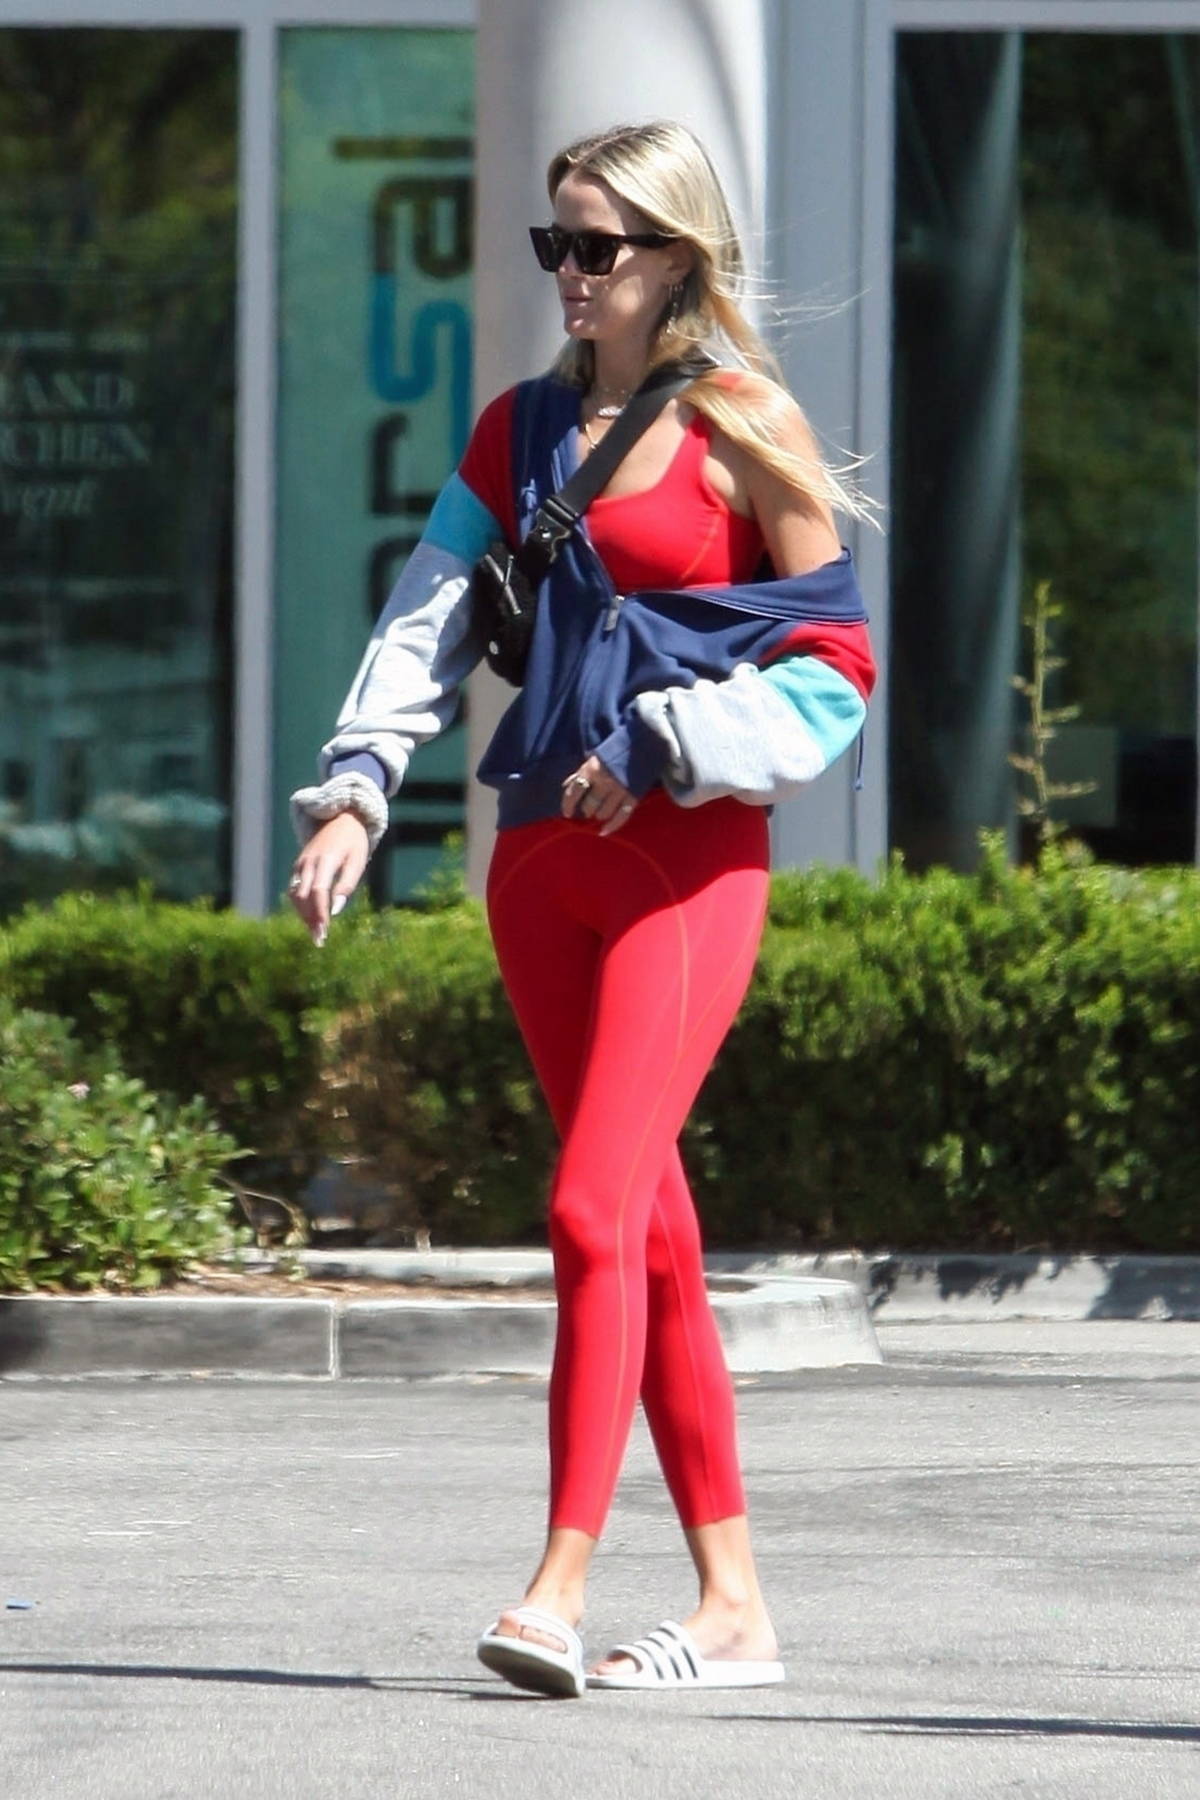 Ava Phillippe looks great in a red sports bra and leggings while